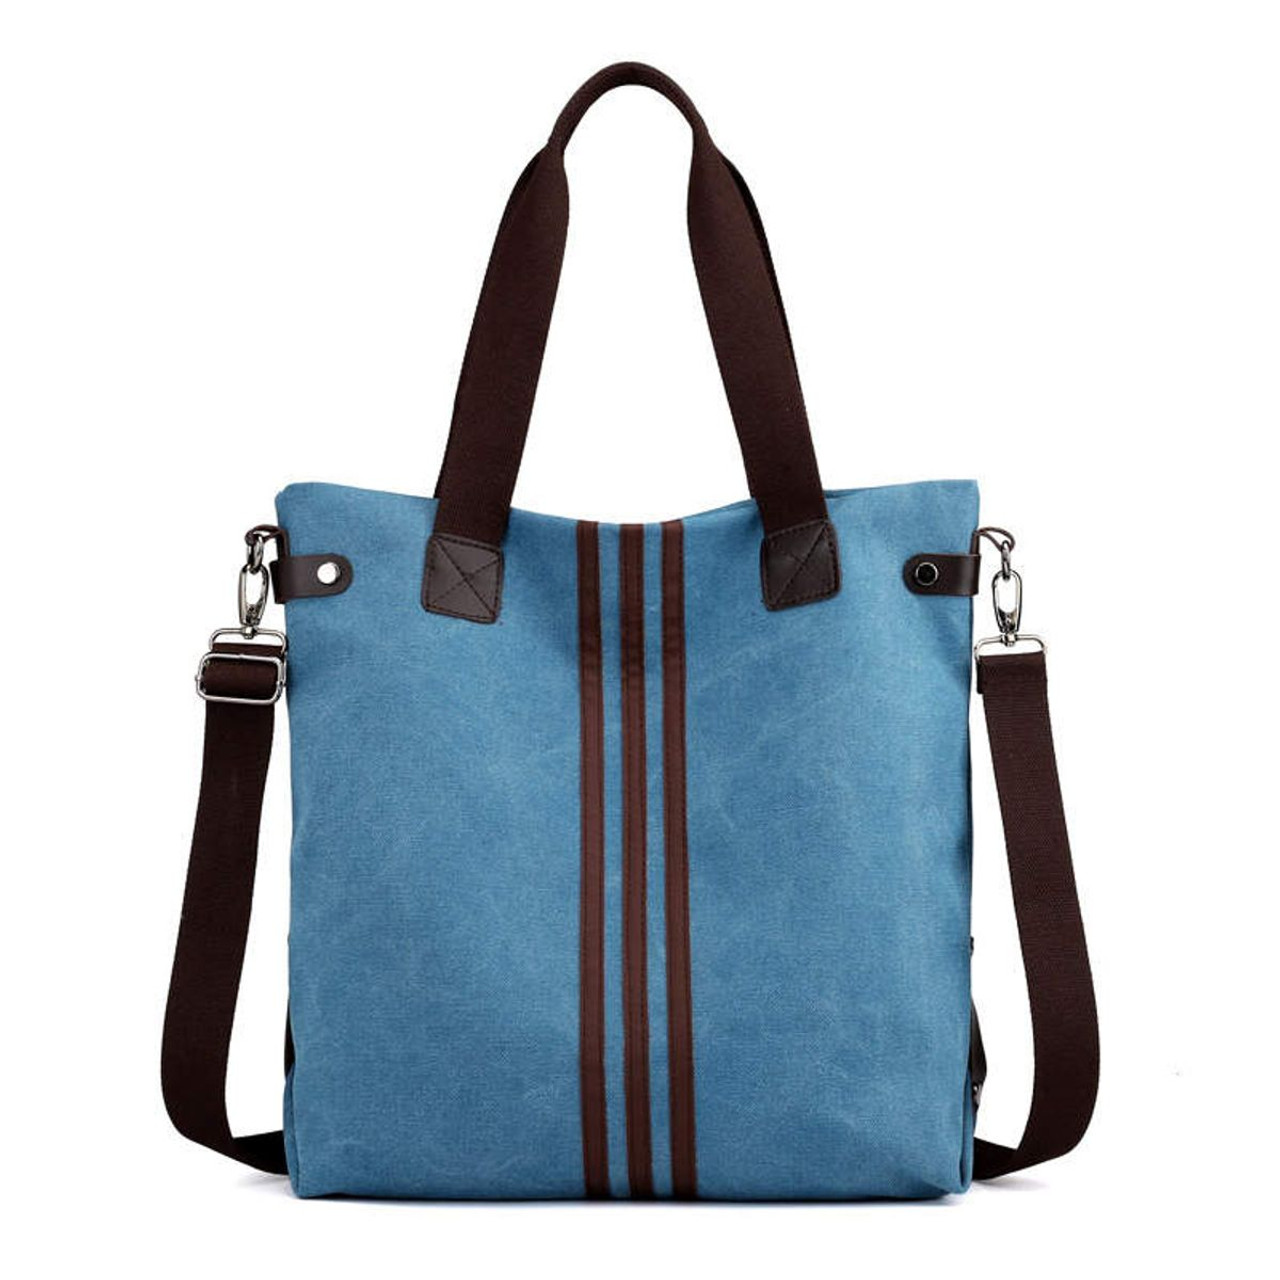 Kelly Canvas Tote Bag for Women product image